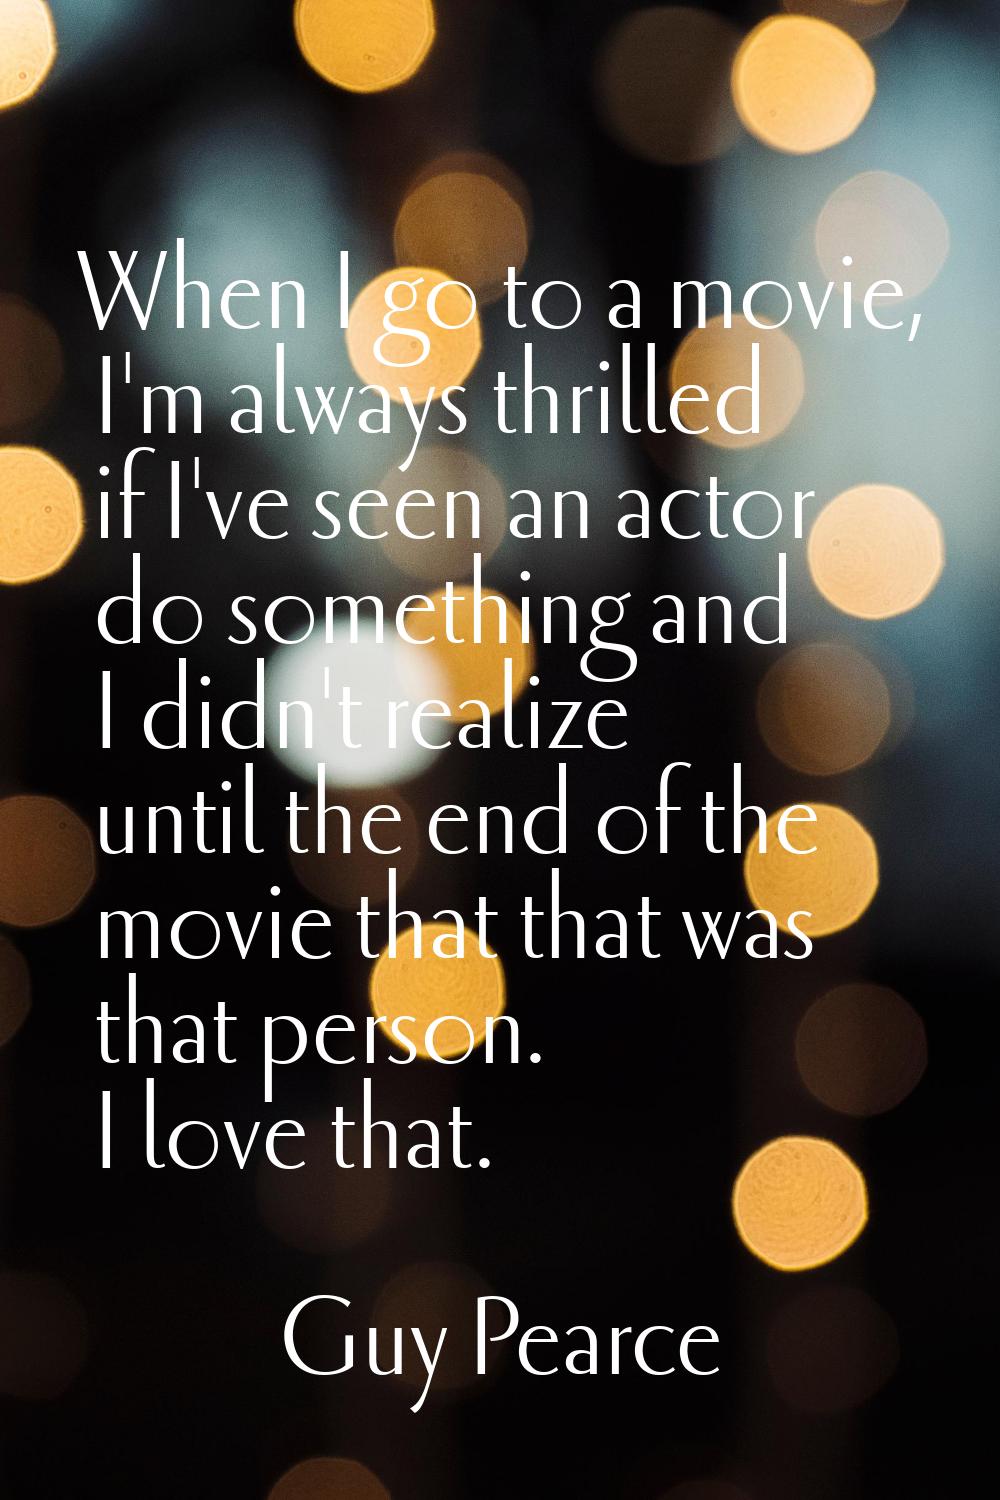 When I go to a movie, I'm always thrilled if I've seen an actor do something and I didn't realize u